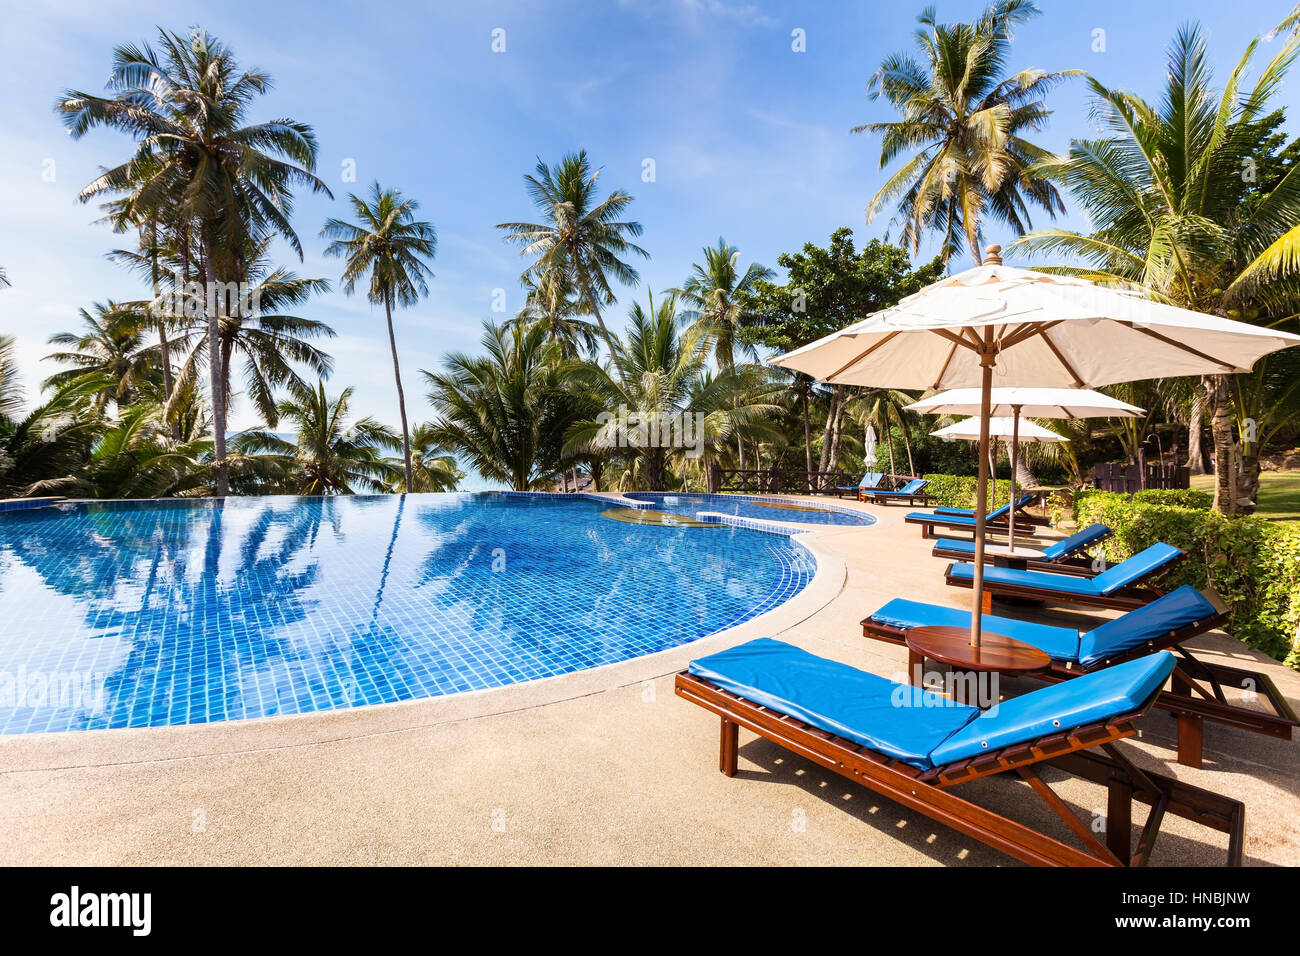 Beautiful tropical beach front hotel resort with swimming pool, sun-loungers and palm trees during a warm sunny day, paradise destination for vacation Stock Photo